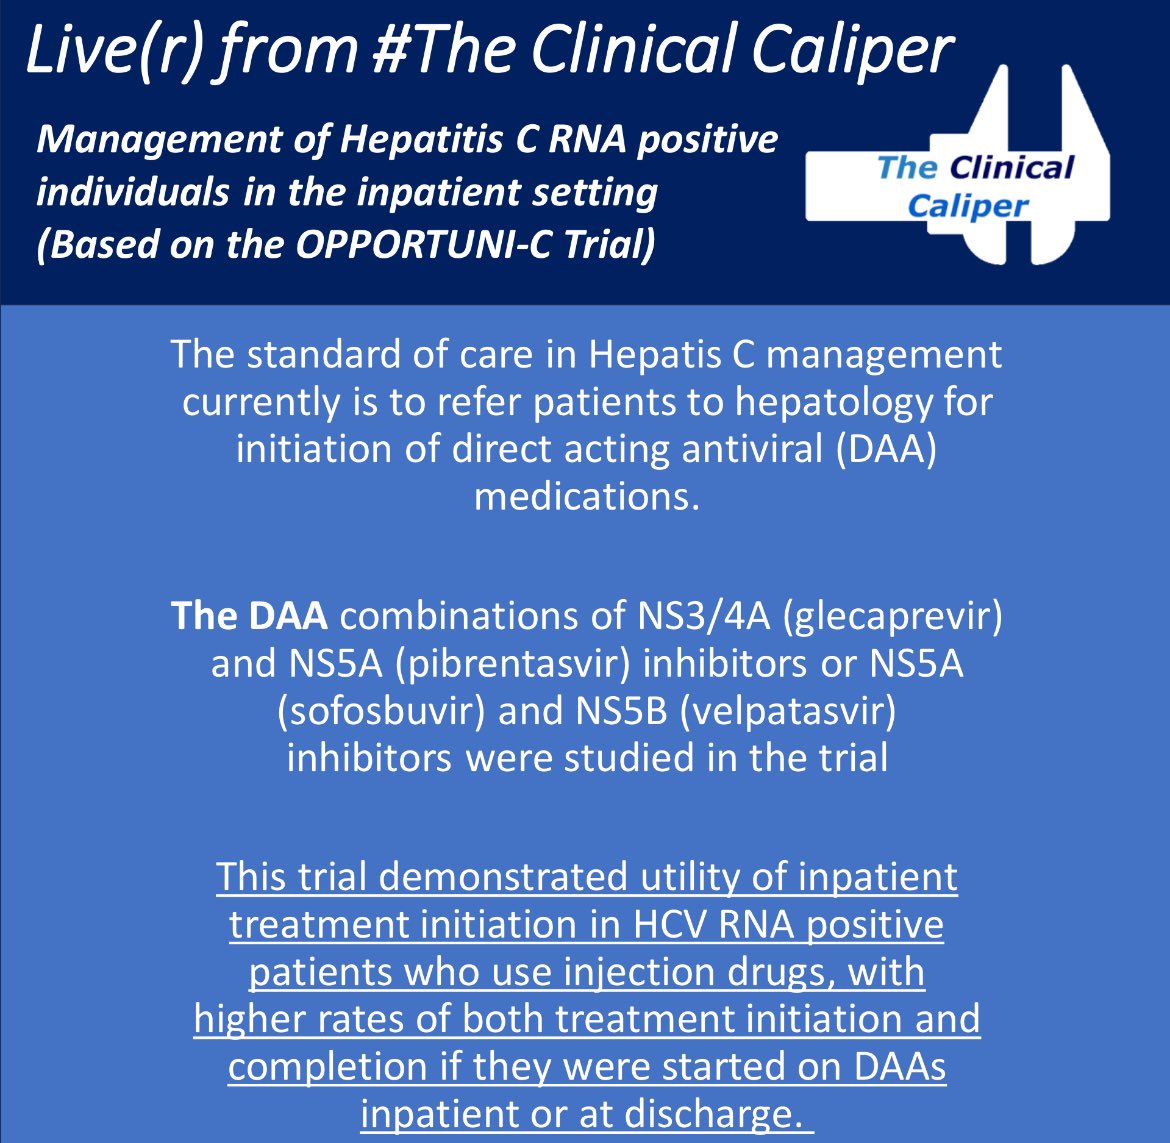 #TheClinicalCaliper with recommendations from the OPPORTUNI-C trial!